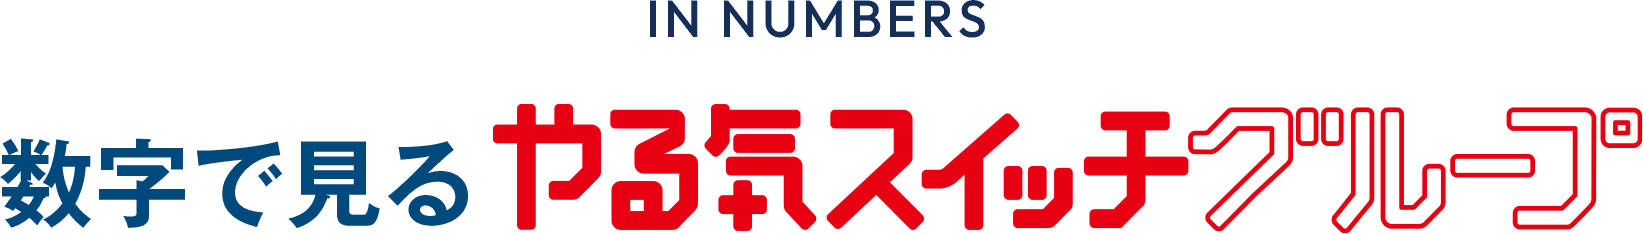 IN NUMBERS 数字で見るやる気スイッチグループ